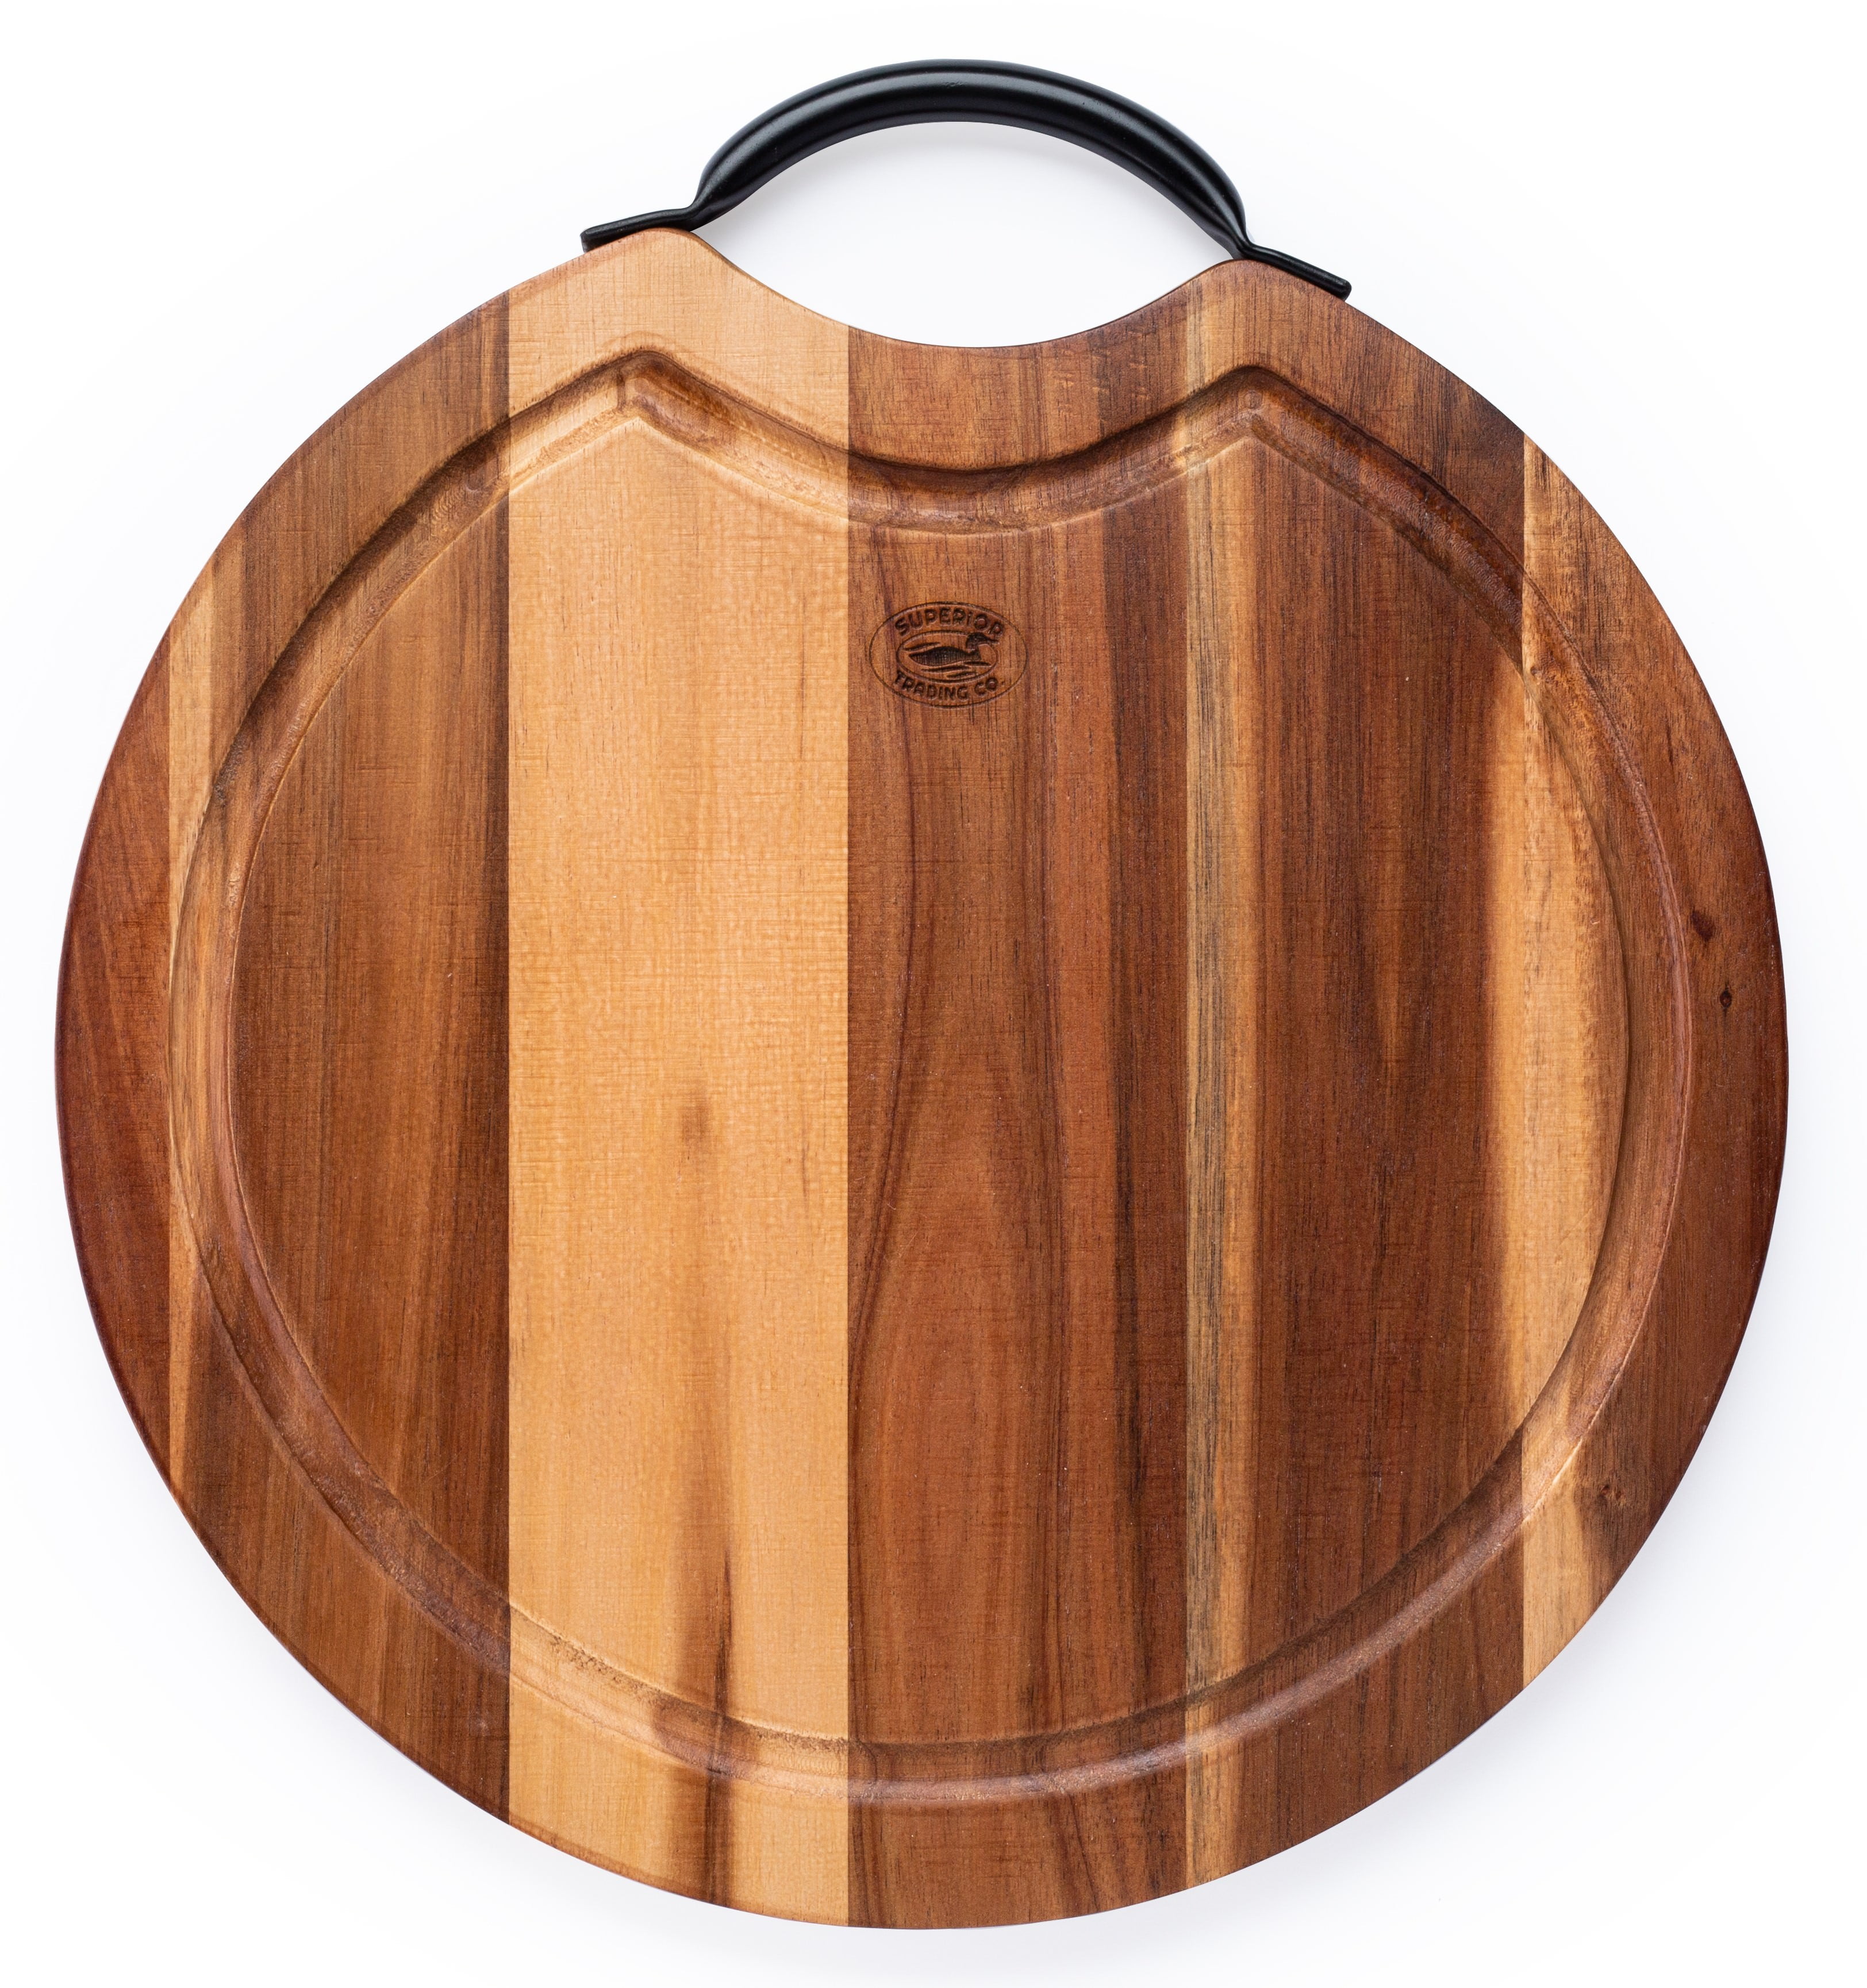 Superior Trading Co Acacia Wood Cutting Board With Steel Handle 14 In Circle 